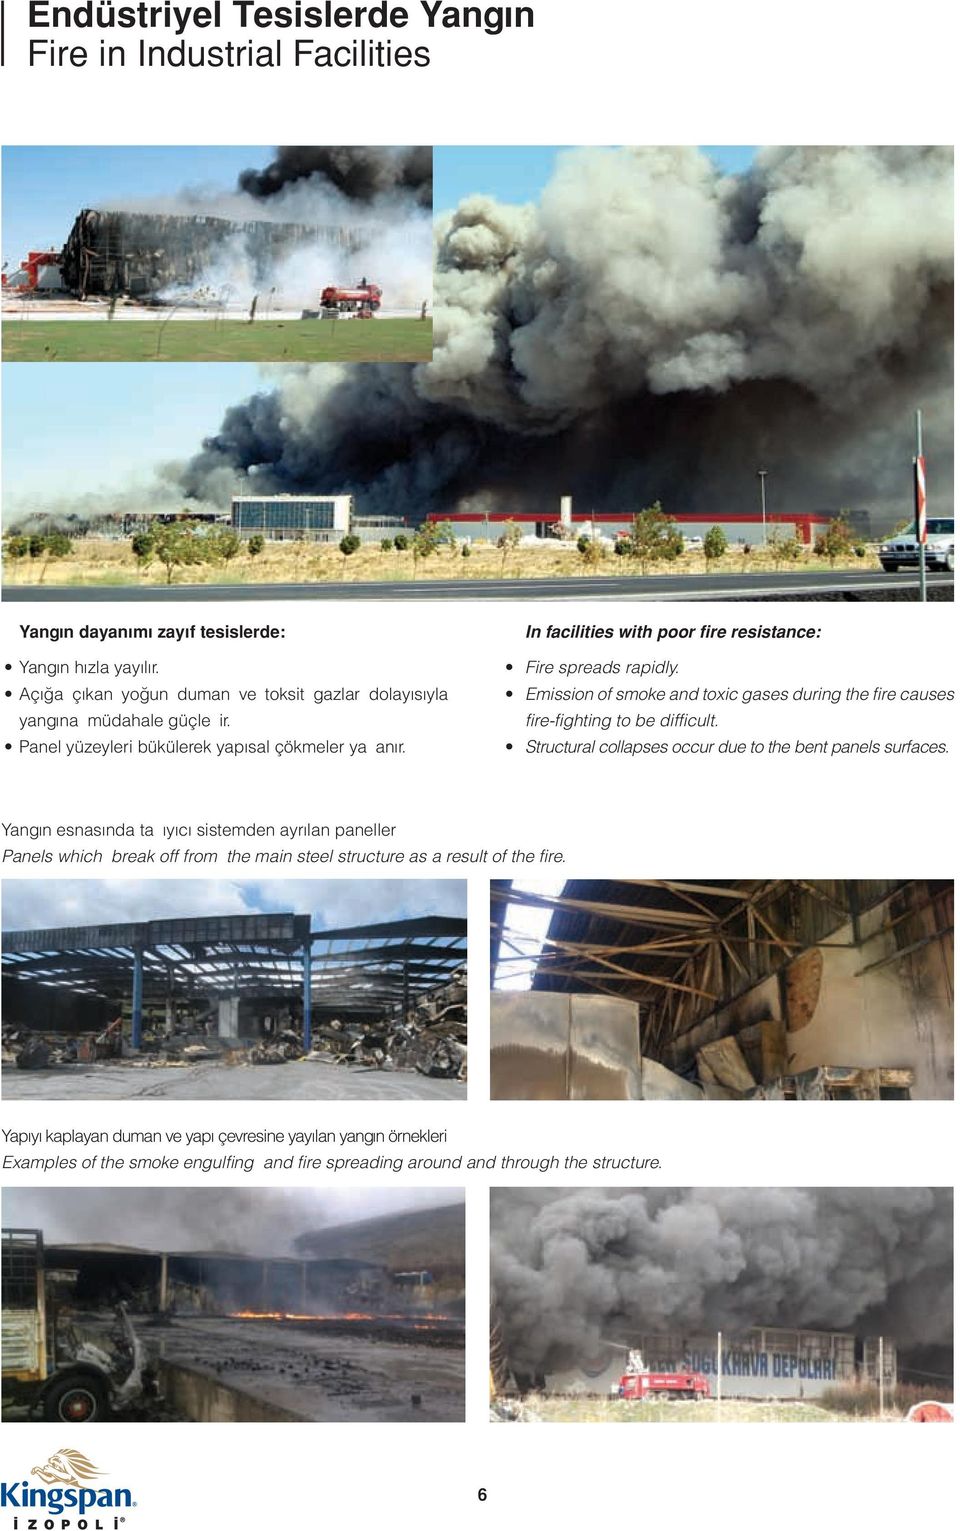 In facilities with poor fire resistance: Fire spreads rapidly. Emission of smoke and toxic gases during the fire causes fire-fighting to be difficult.